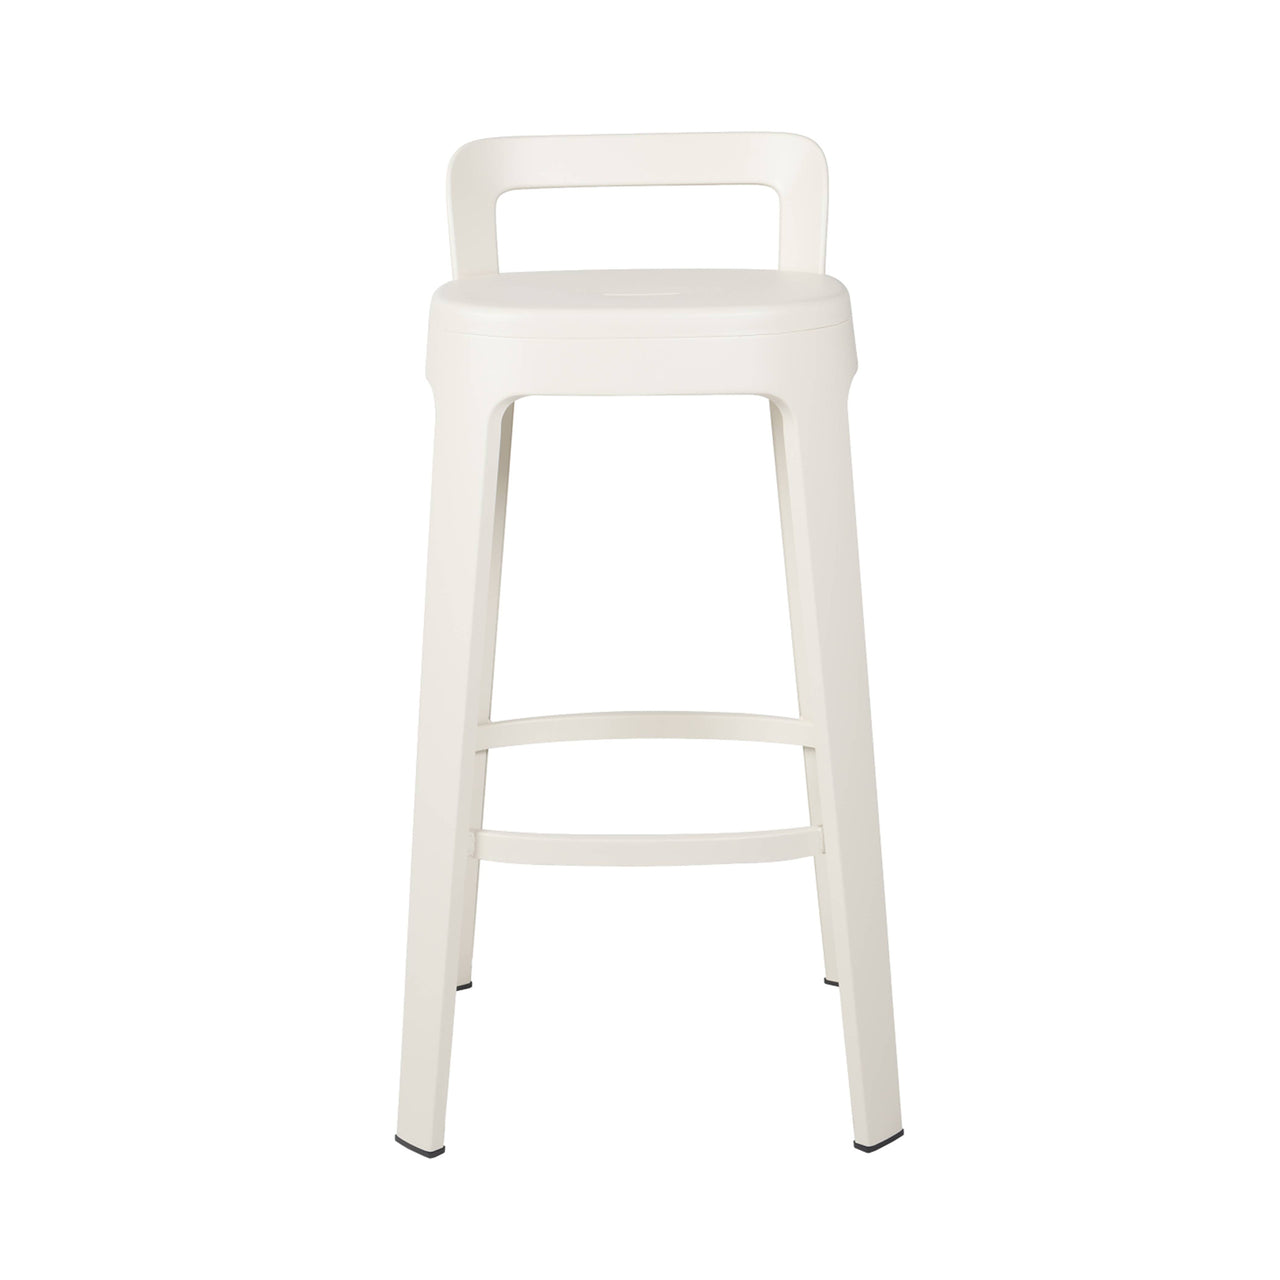 Ombra Bar + Counter Stool with Backrest: Bar + White